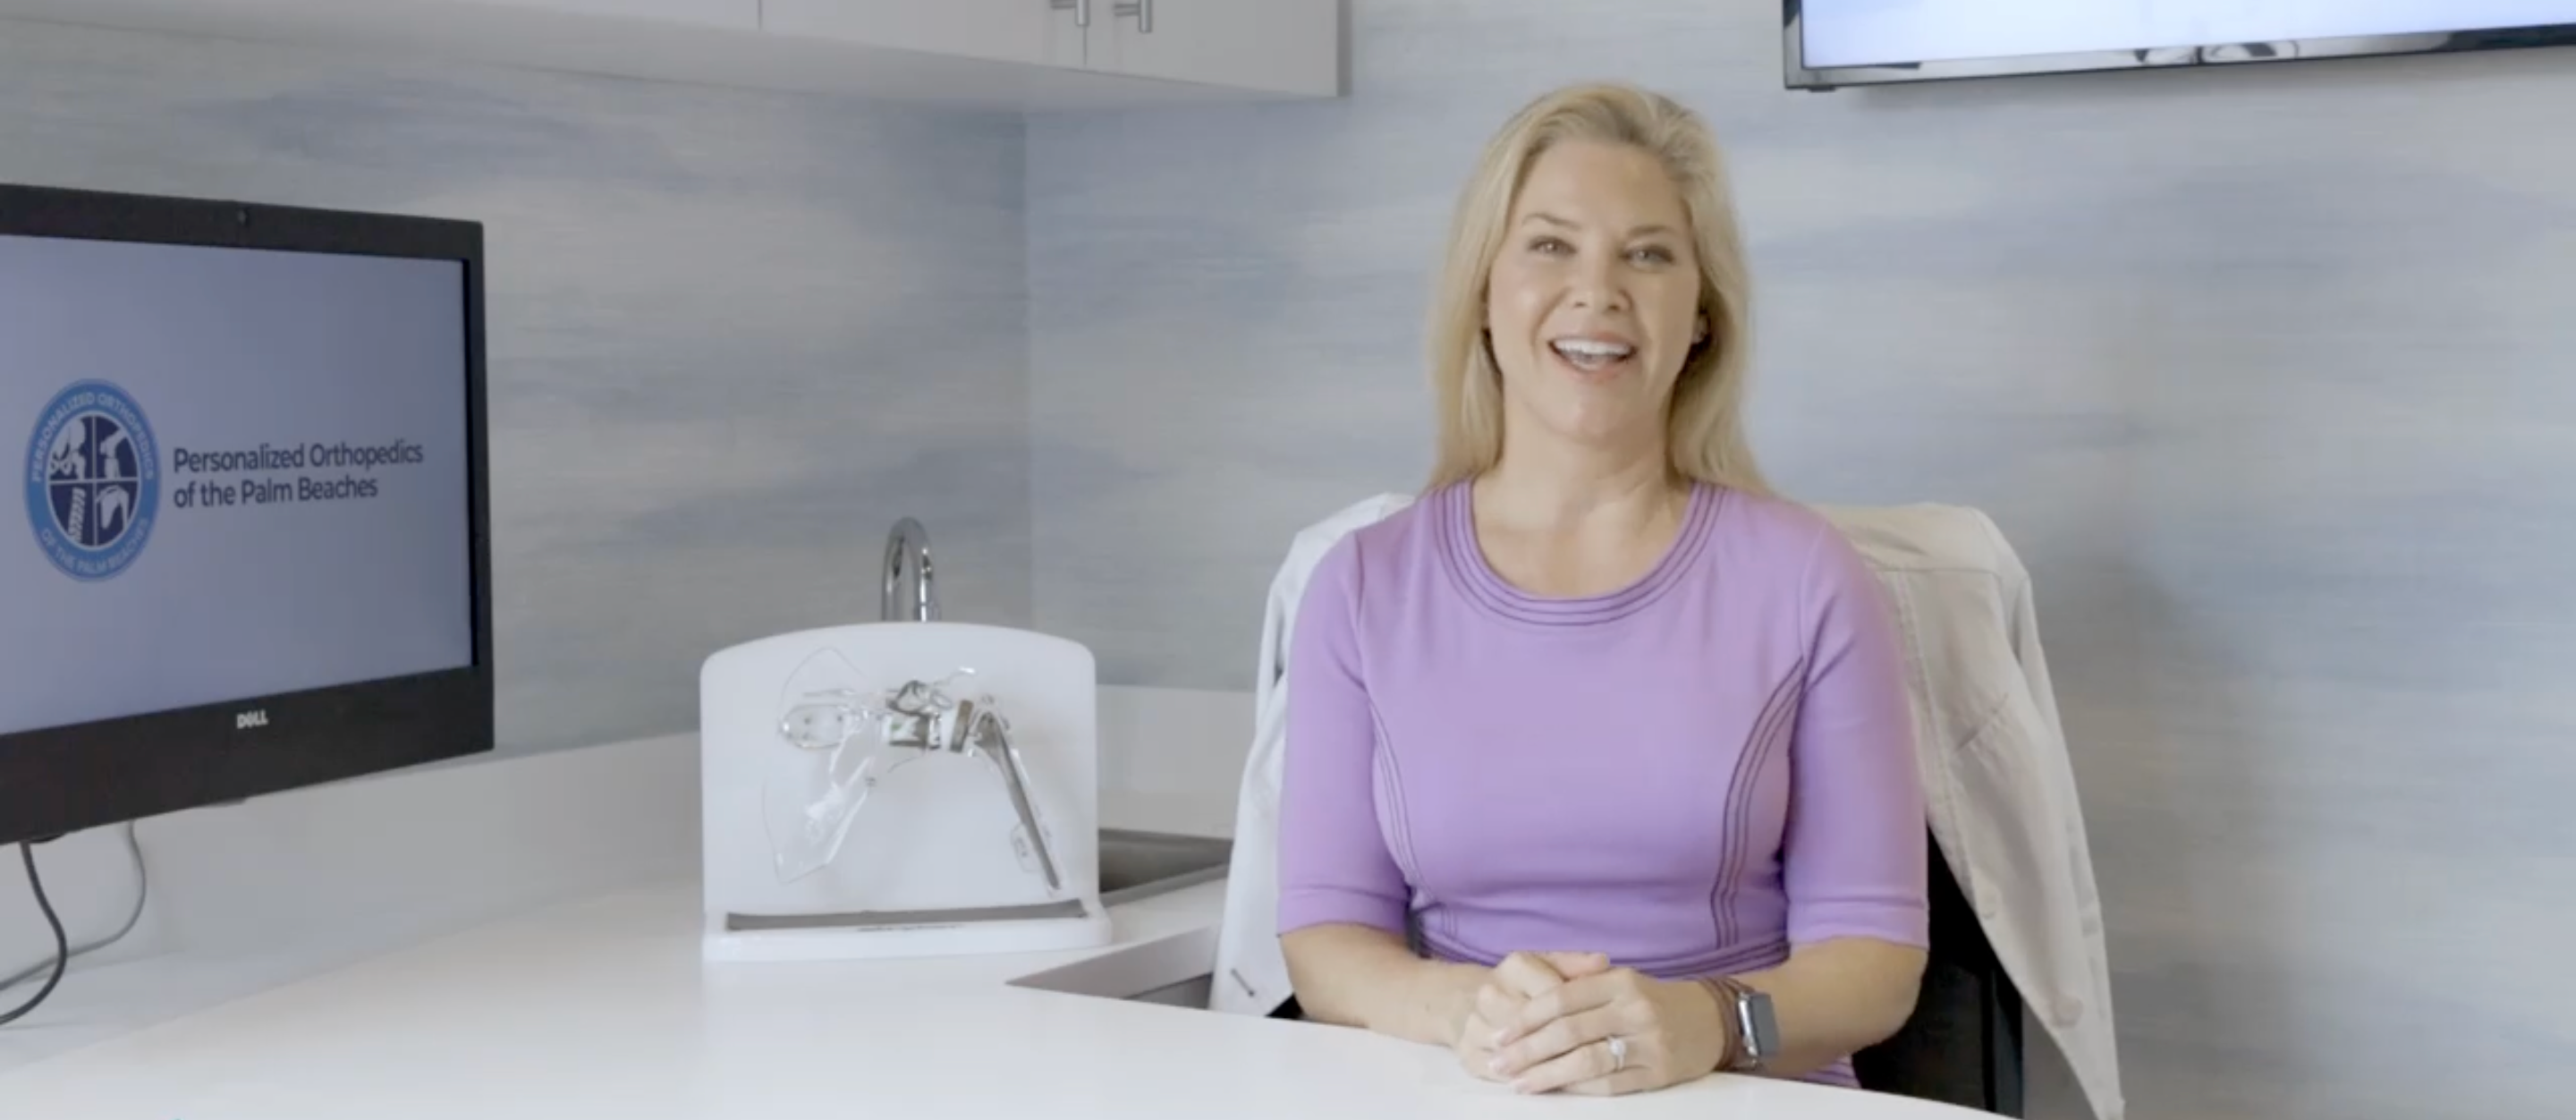 Meet Dr. Jennifer Tucker, MD, a unique blend of orthopedic surgery expertise and equestrian passion in Boynton Beach, Florida